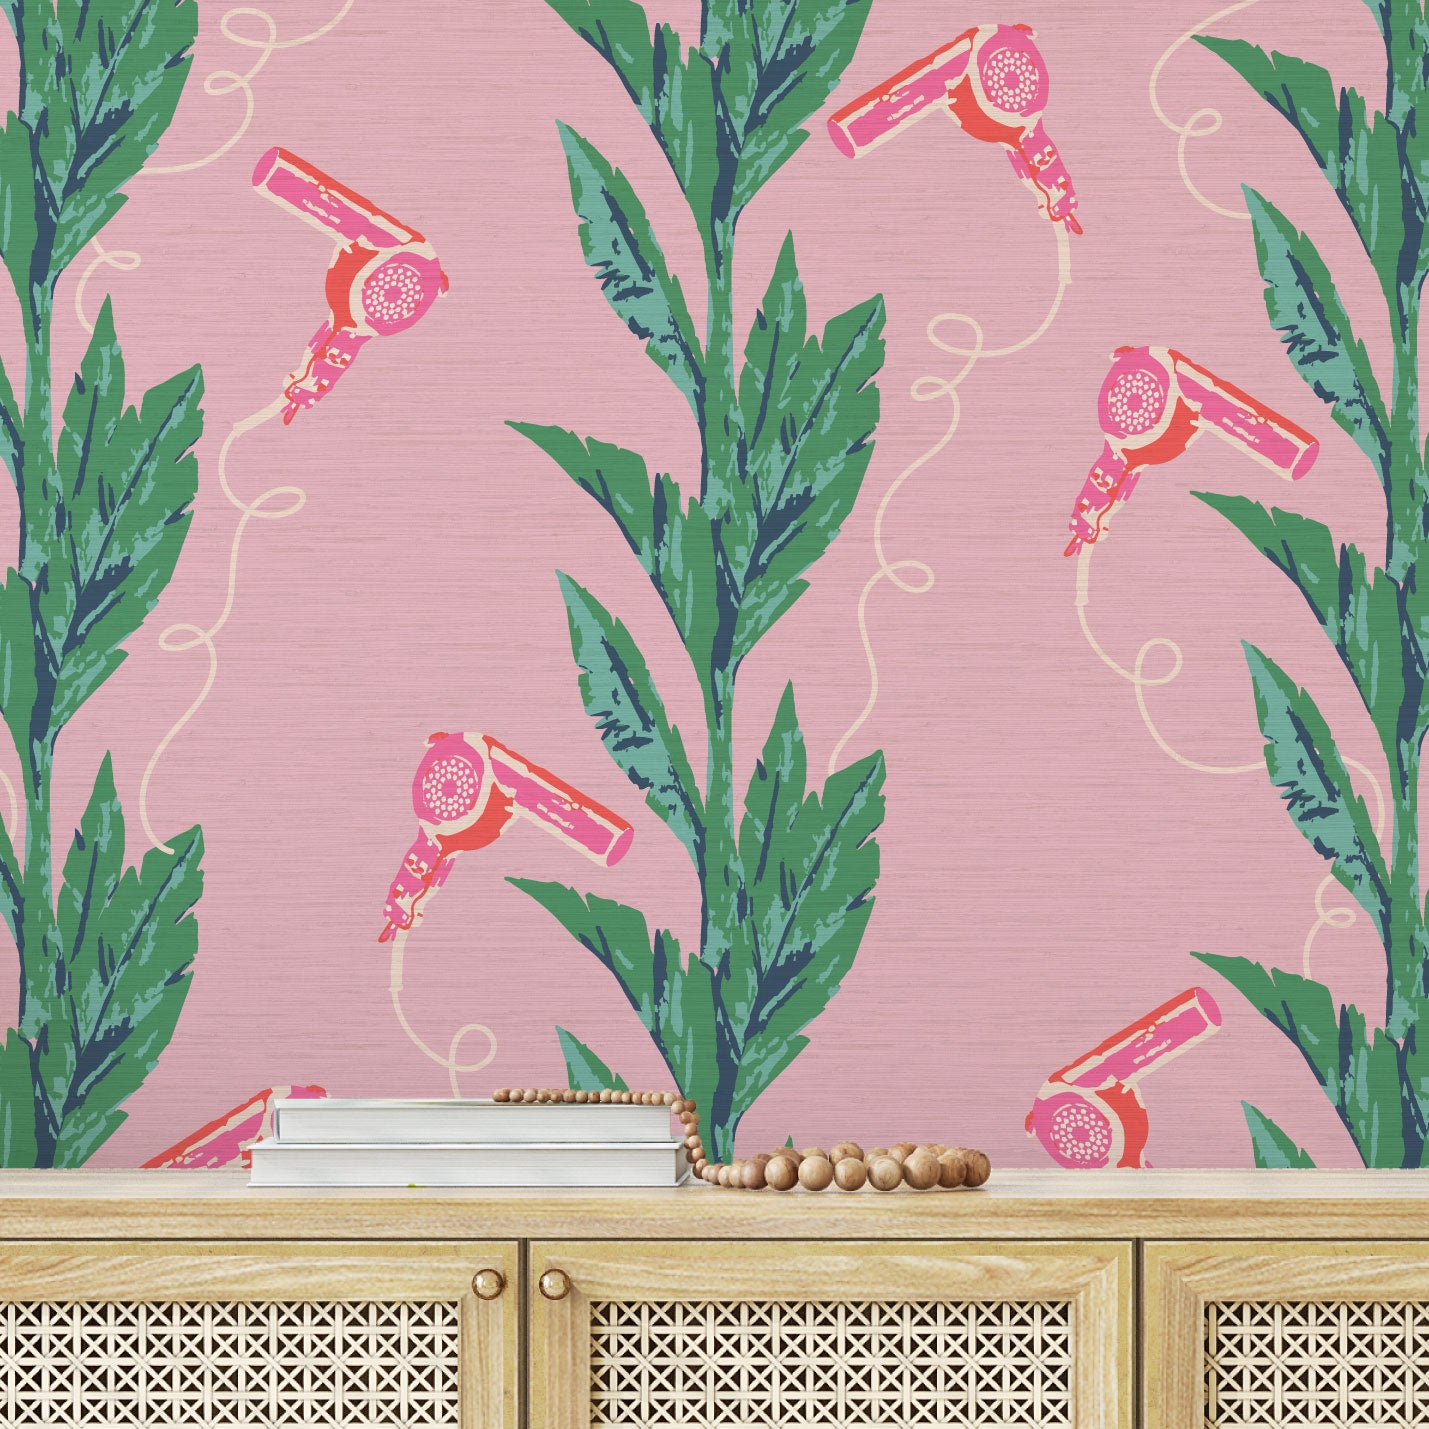 pink based printed grasscloth wallpaper with green leaf vertical stripes paired with pink hair blow dryers popping out of them Grasscloth Natural Textured Eco-Friendly Non-toxic High-quality  Sustainable practices Sustainability Interior Design Wall covering Bold Wallpaper Custom Tailor-made Retro chic Tropical Salon  Beauty Hair Garden jungle